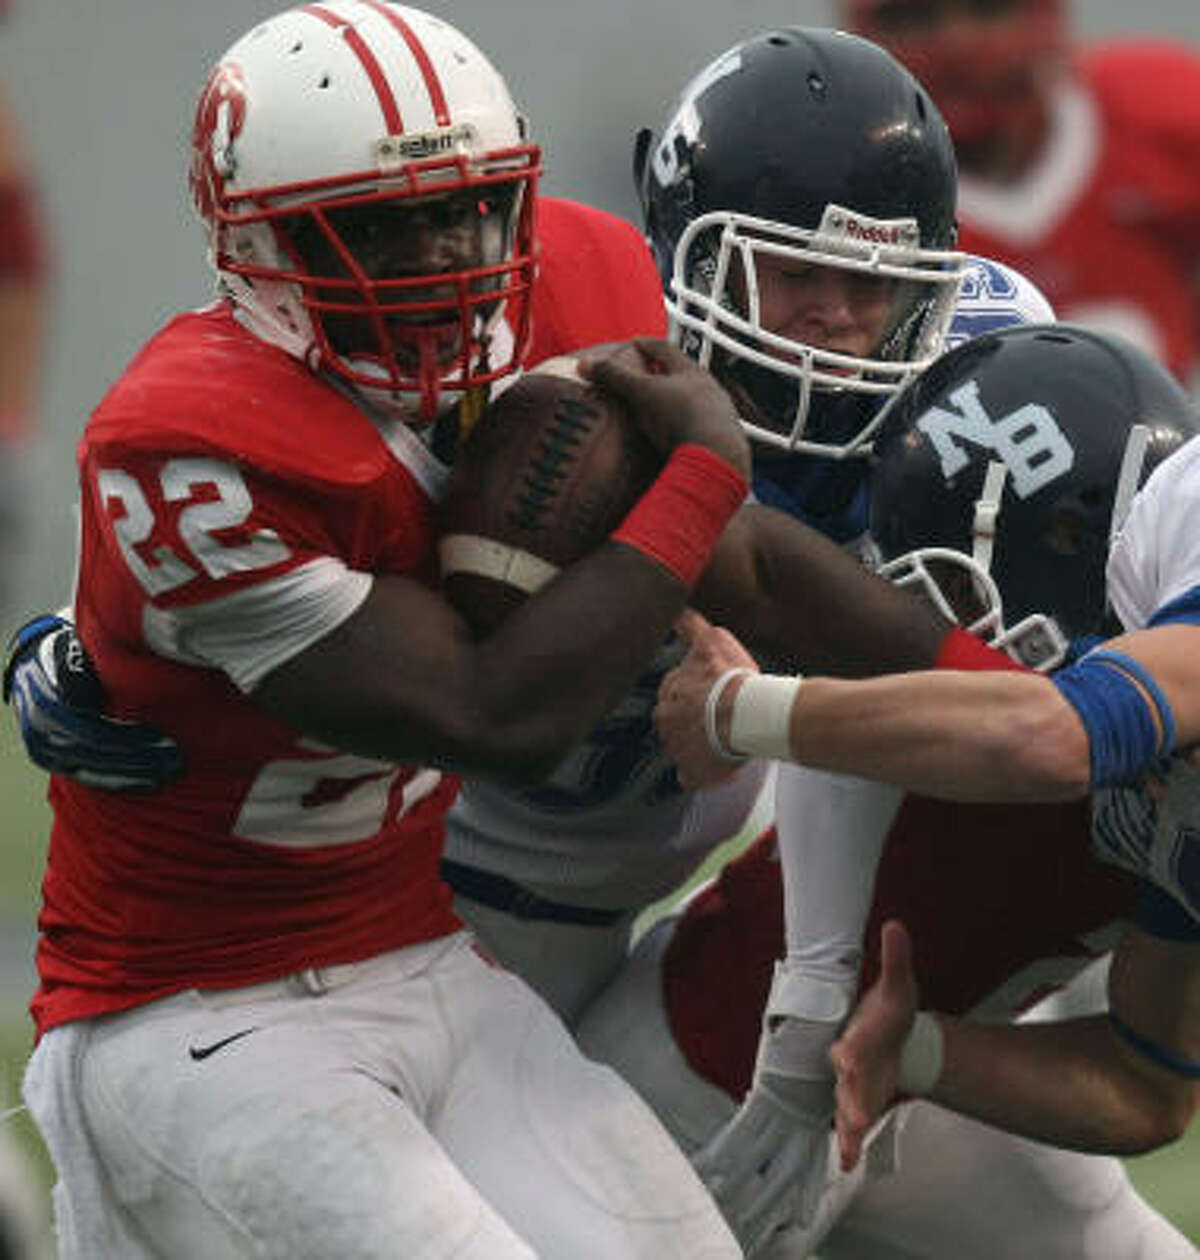 Katy running back Donovonn Young rushed for 2,332 yards and 35 touchdowns in 2010.